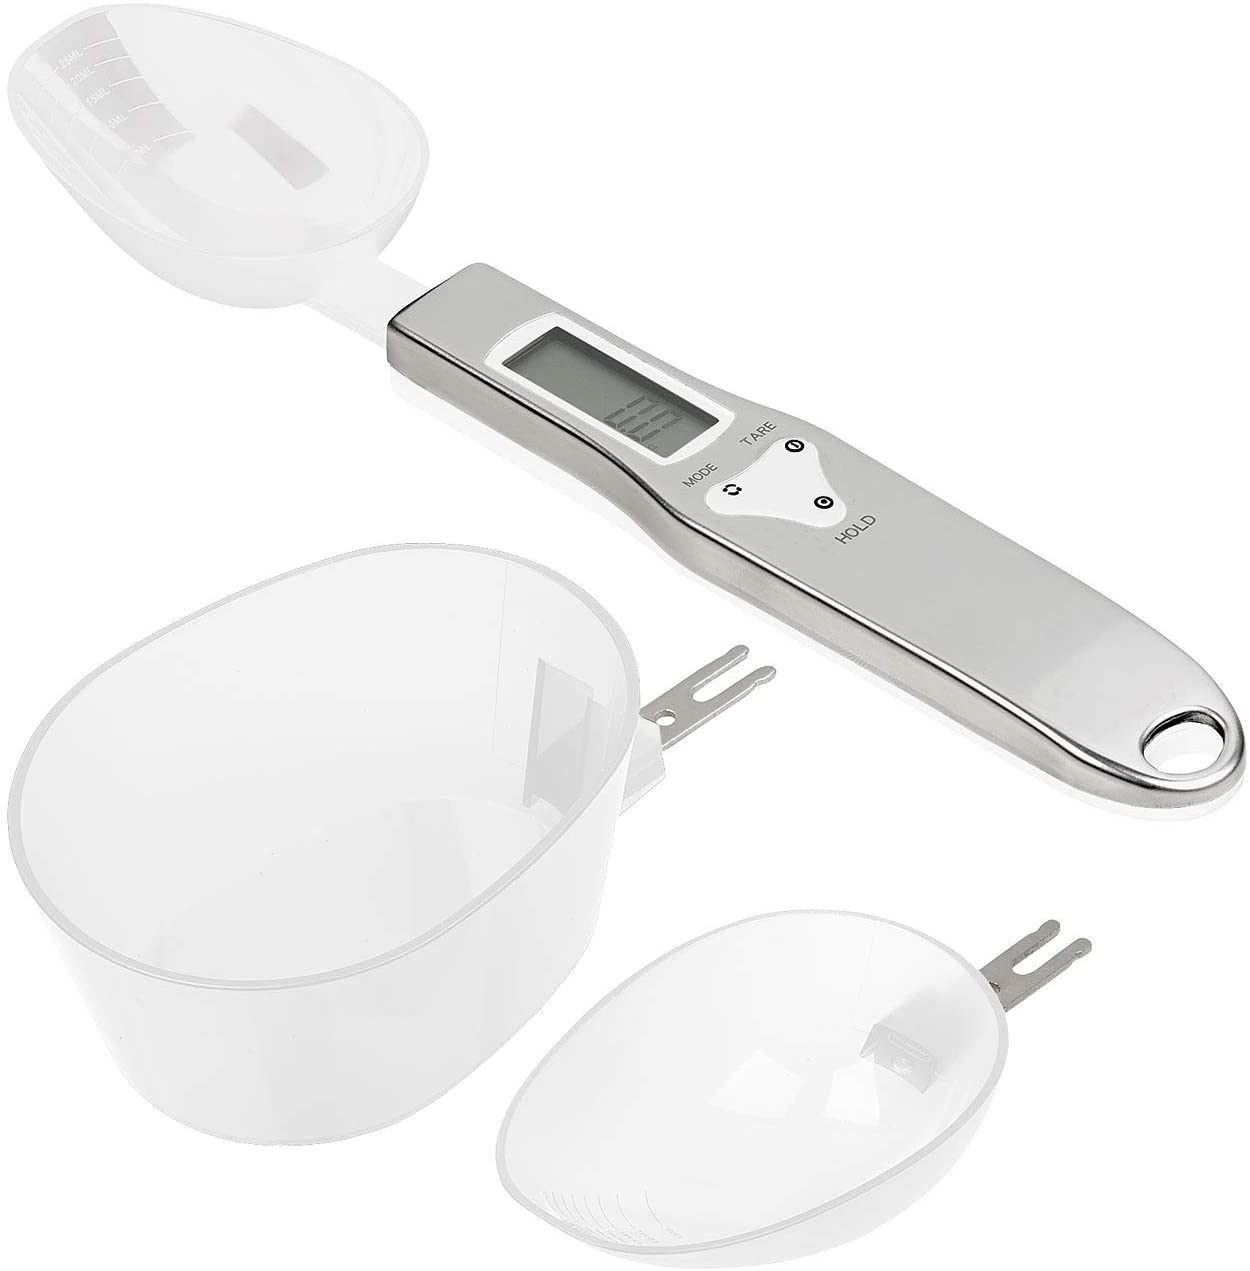 ROSENSTEIN & SOHNE Rosenstein & Söhne Digital Spoon Scales for Powder and Spices up to 300 g LCD Display